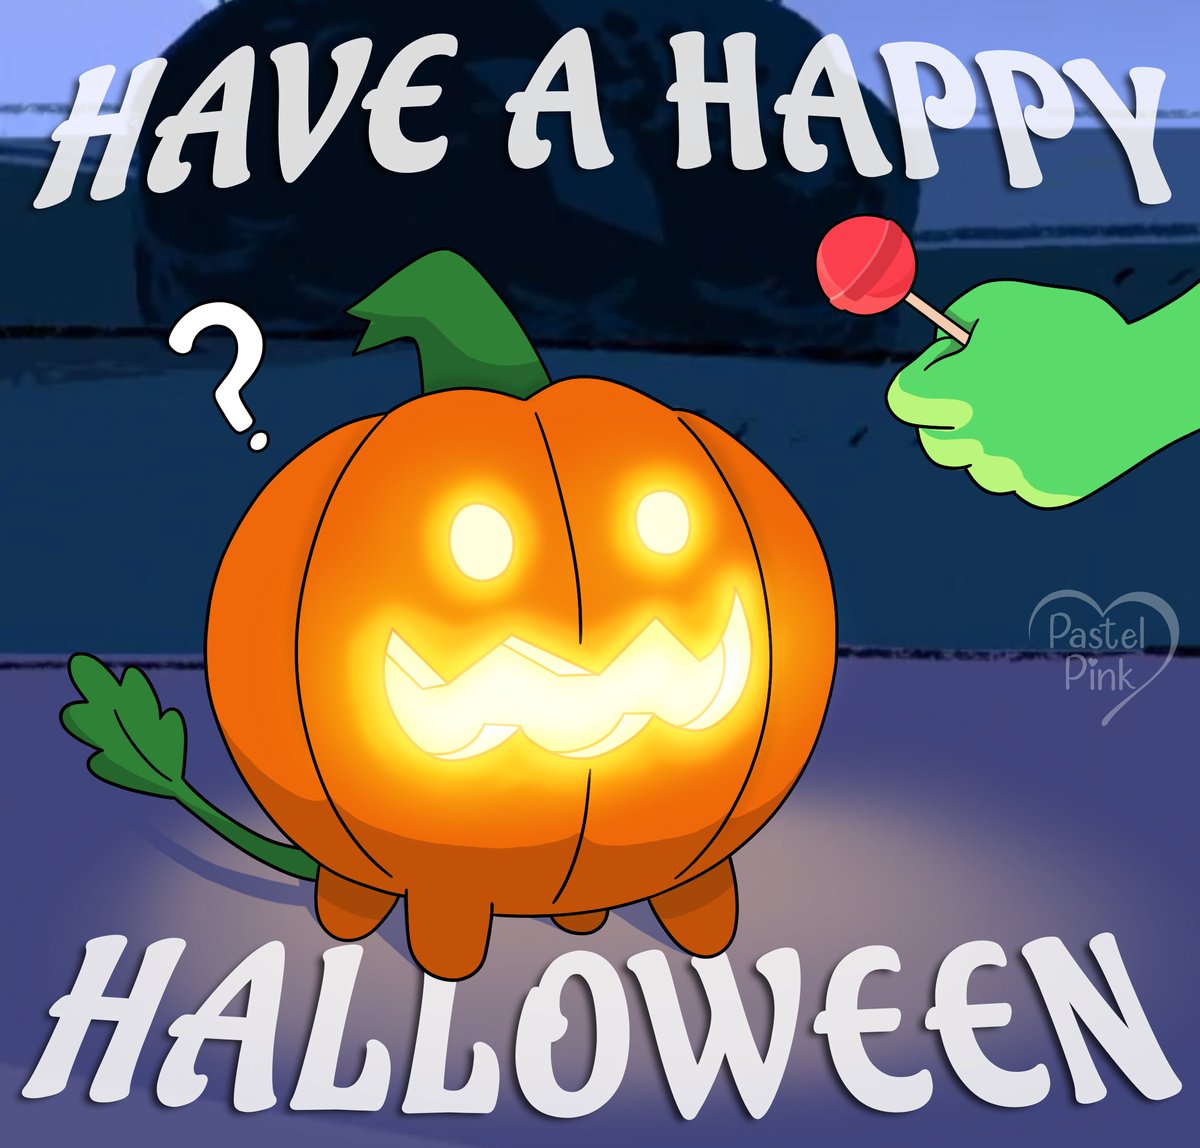 Peridot still hasn't quite grasped how candy works, but she wishes you all a Happy Halloween! (whatever that means🎃) #stevenuniverse #halloween #pumpkin #peridot